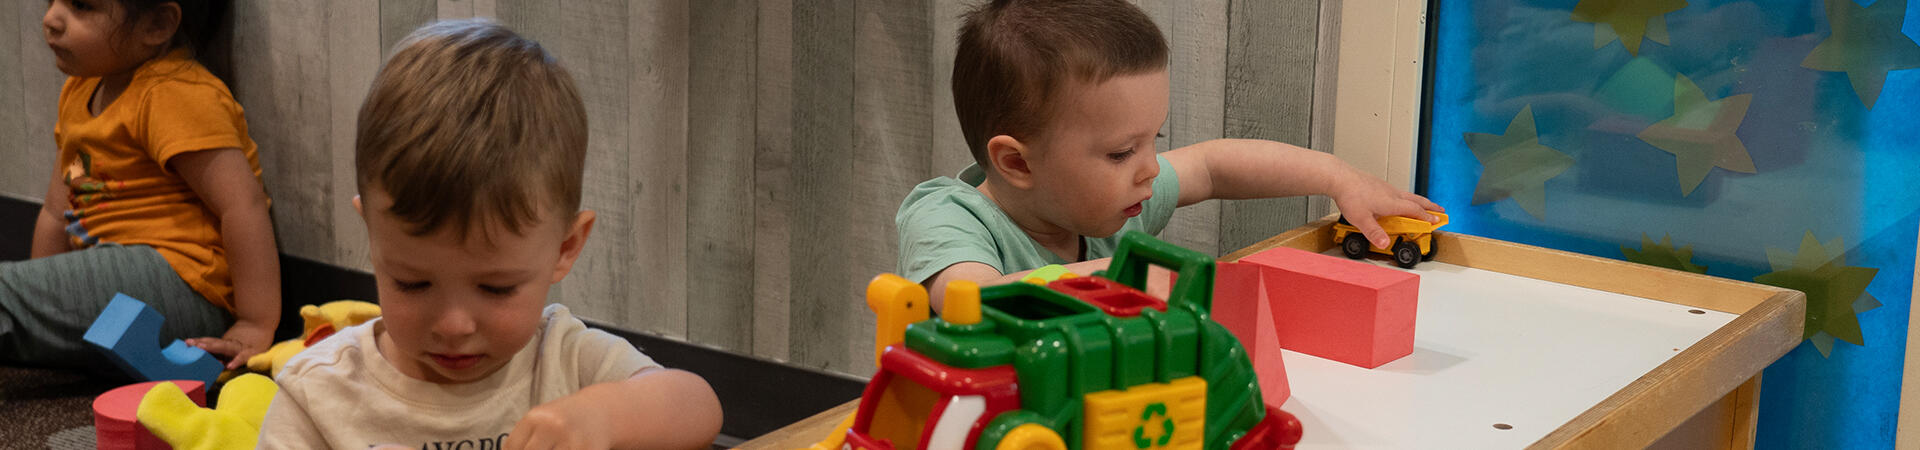 two toddlers playing with cars at table